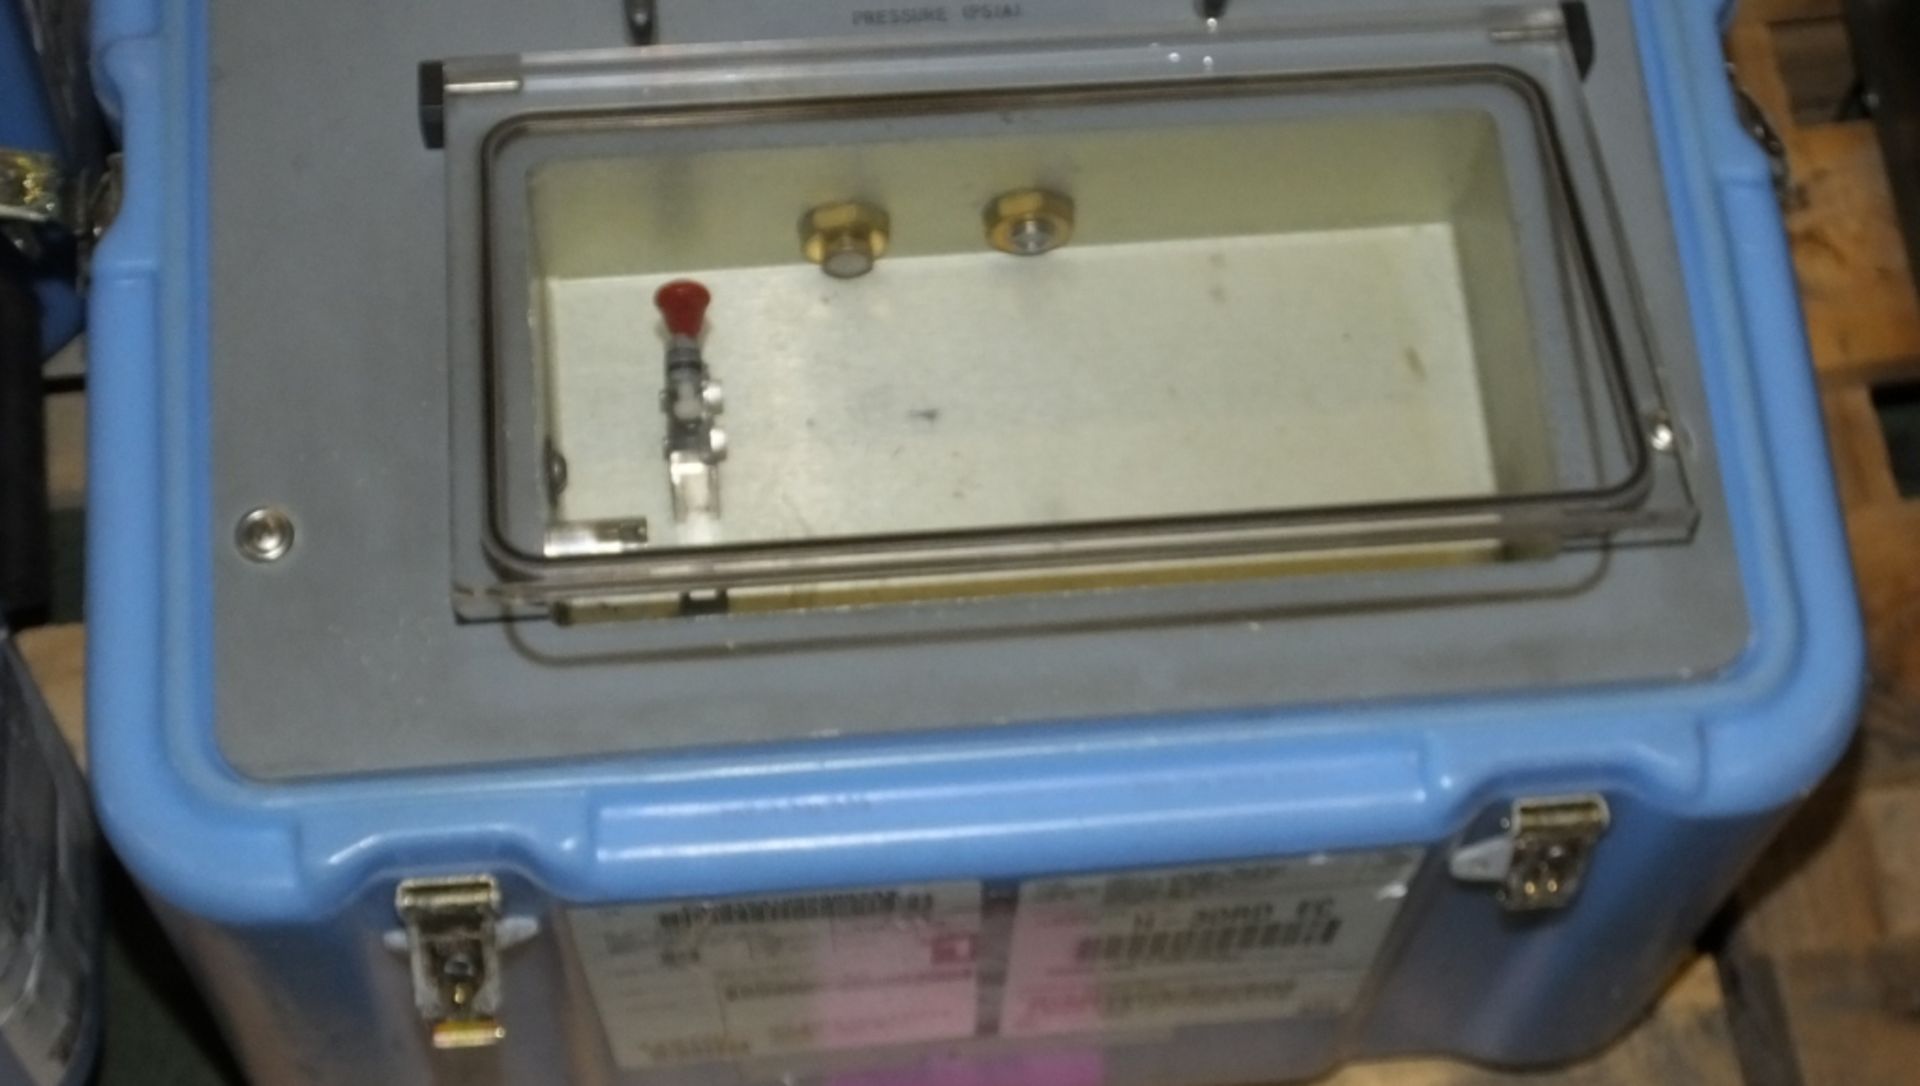 Scot Inc. Automatic Parachute Release Tester - NSN 4920-01-366-3100 - Image 3 of 3